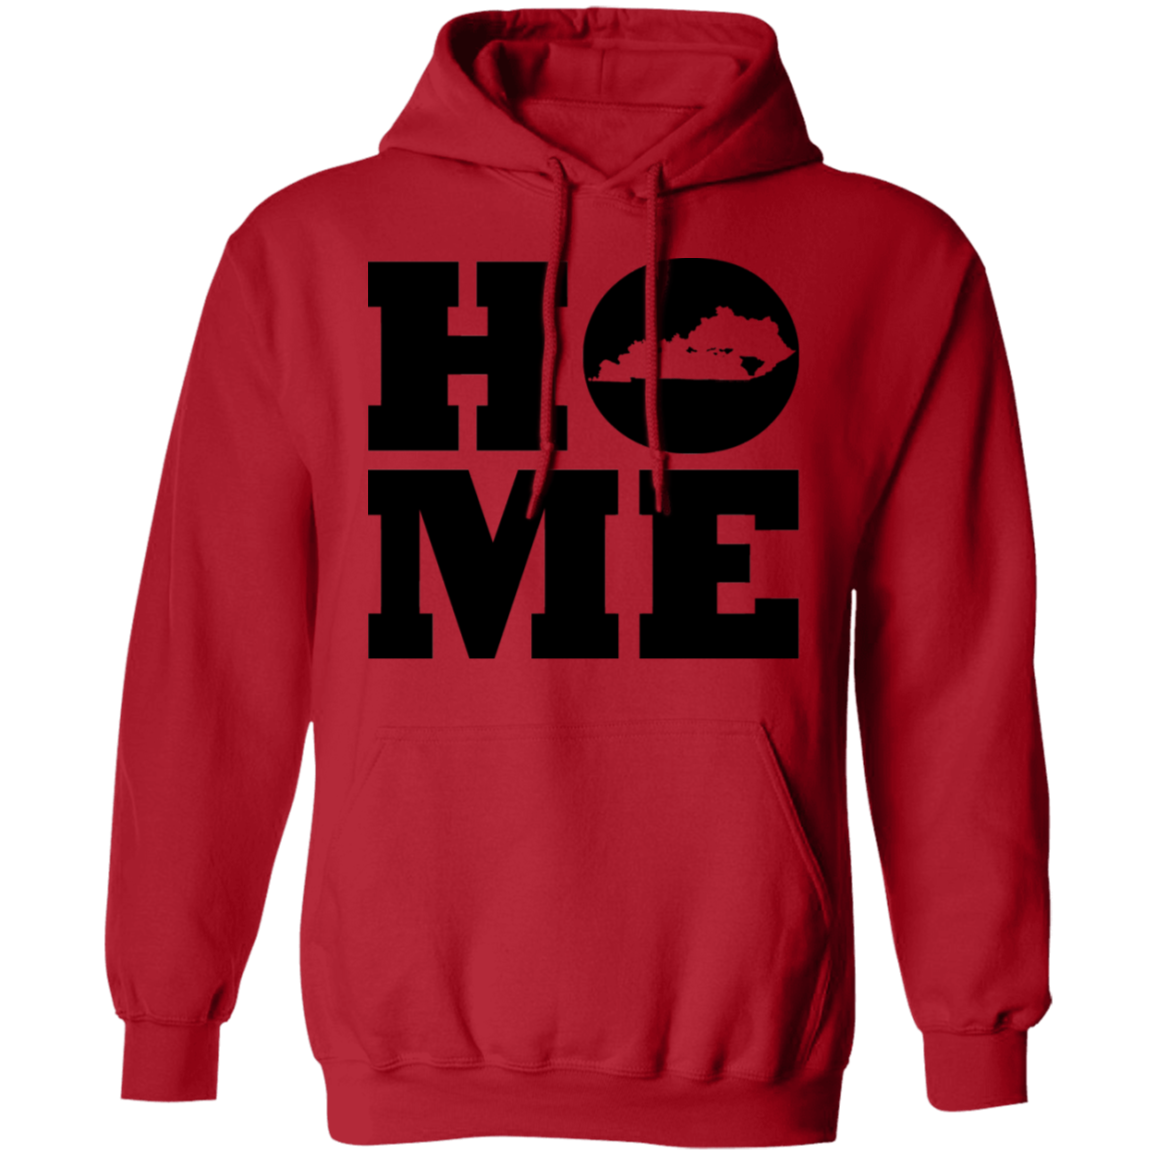 Home Roots Hawai'i and Kentucky Pullover Hoodie